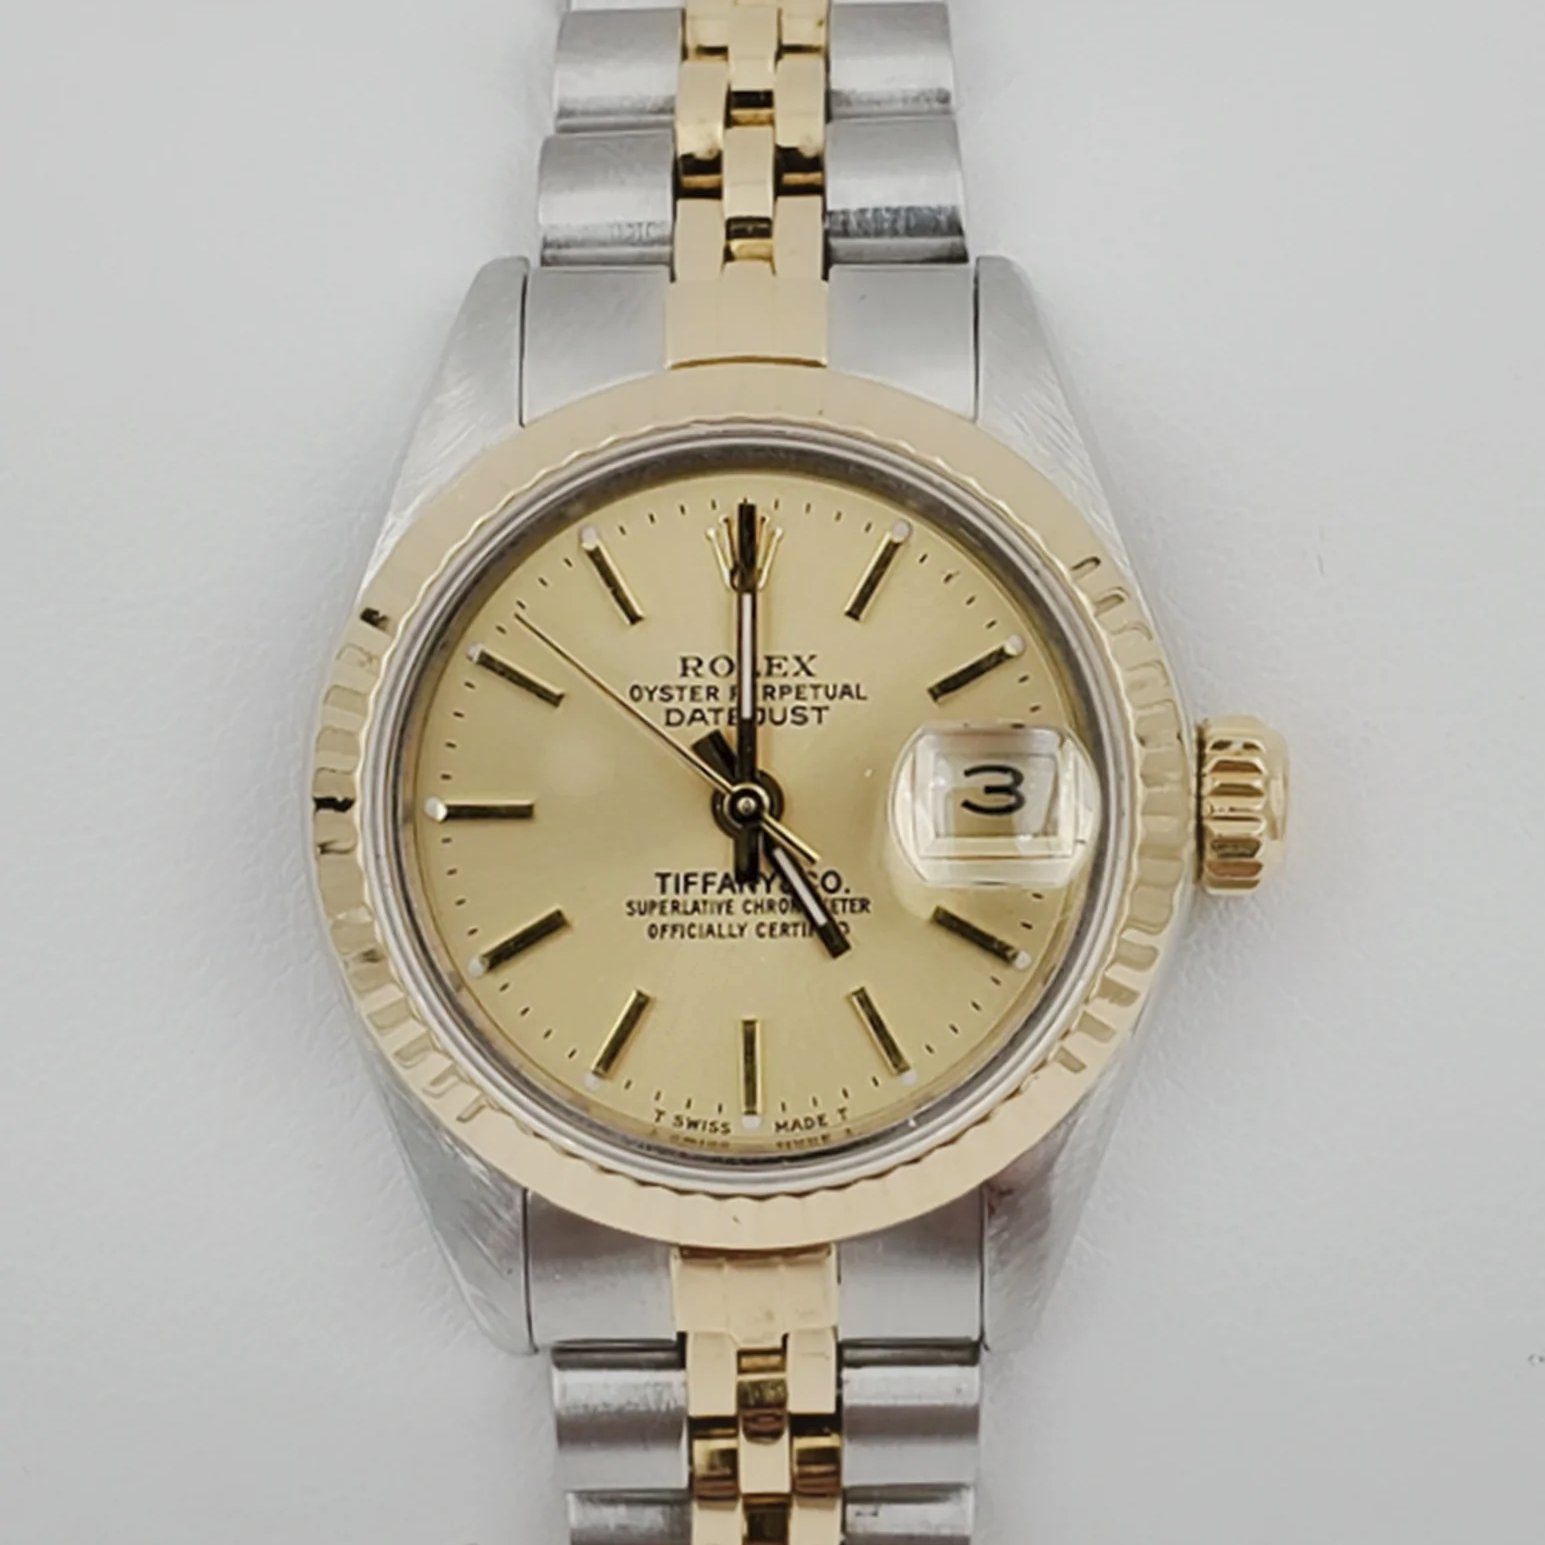 Women's Rolex 26mm Vintage DateJust Two-Tone 18K Gold Watch with Champagne Tiffany Dial and Fluted Bezel. (Pre-Owned)